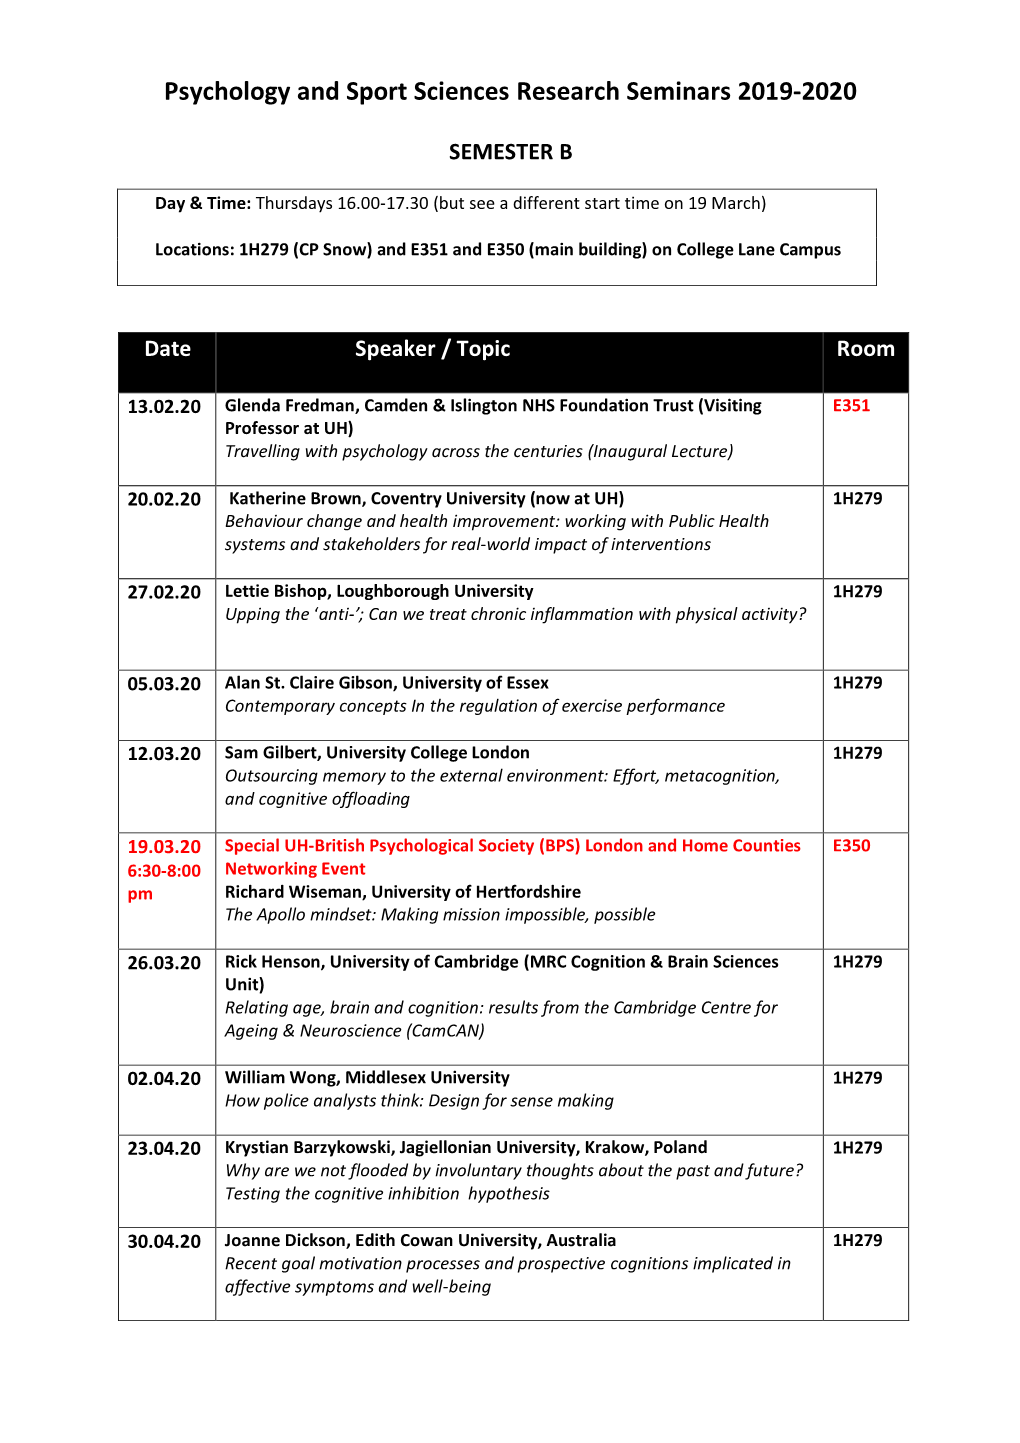 Psychology and Sport Sciences Research Seminars 2019-2020